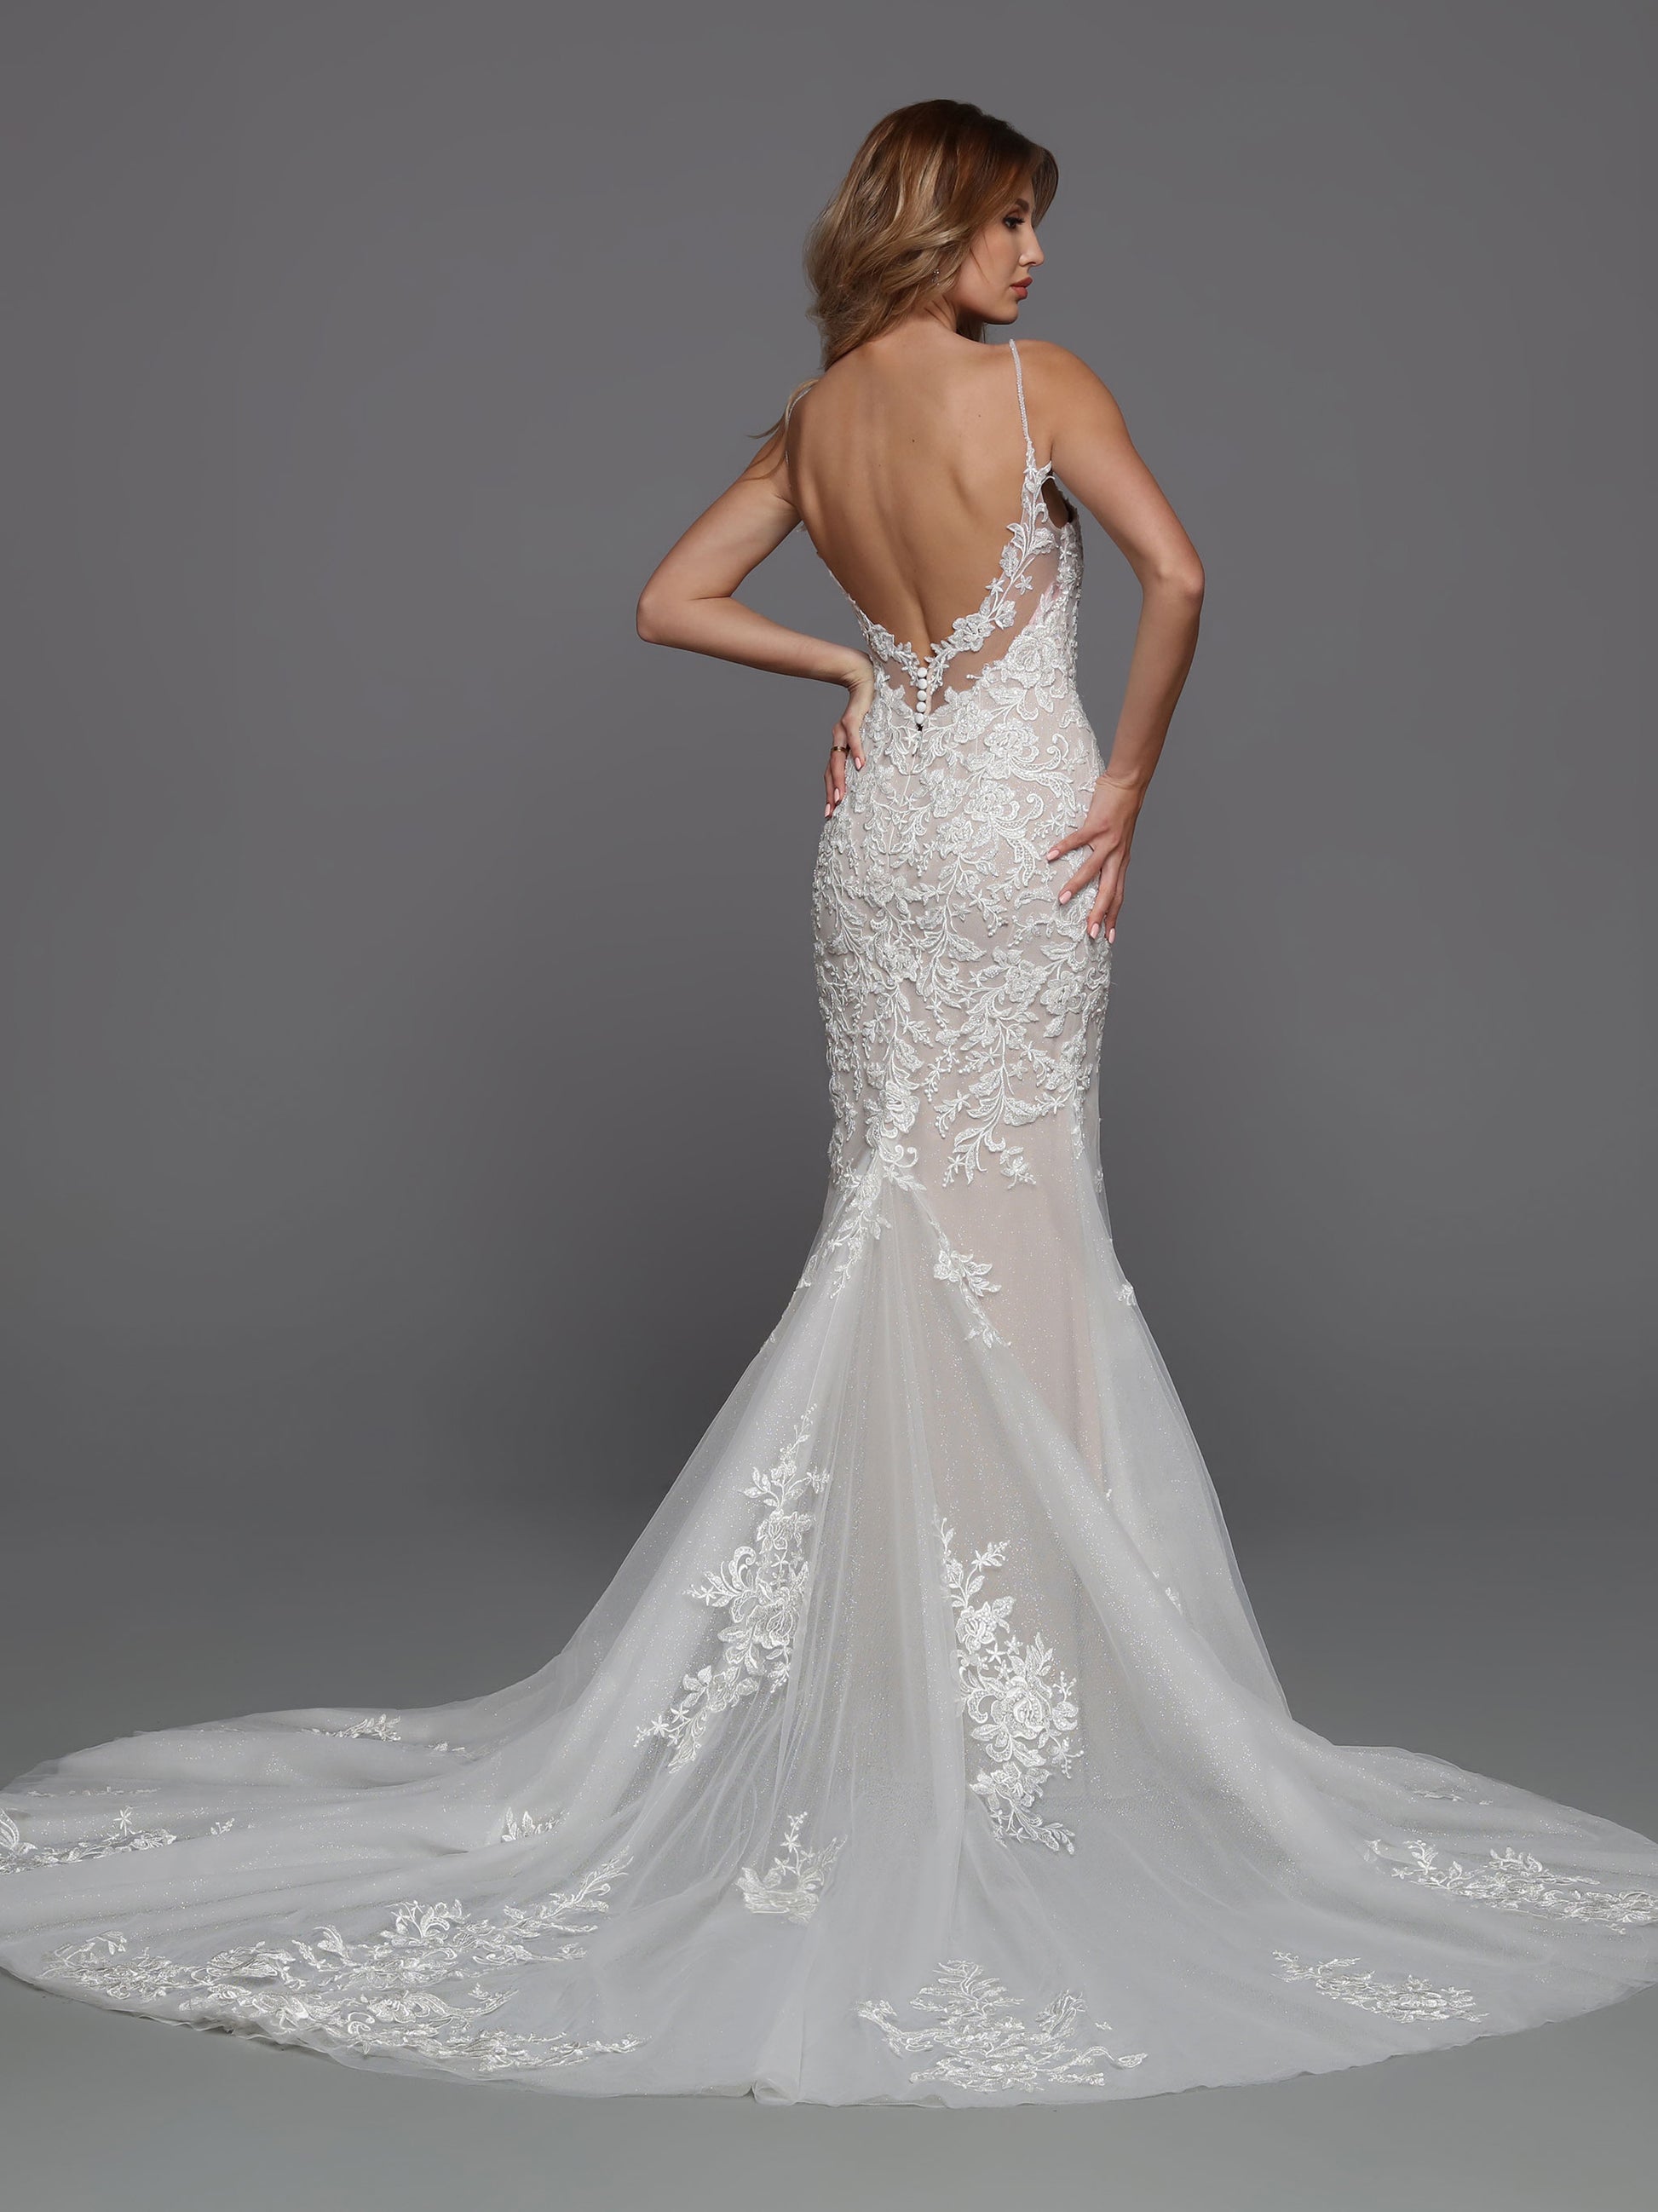 DaVinci Bridal 50720 Lace Wedding Dress Column Detachable Overskirt V Neckline Sheer Back  This is a long beautiful wedding dress with a deep v neckline and sheer panel.  The back is mid back and has sheer lace.  It is a long column bridal gown with a long train. 